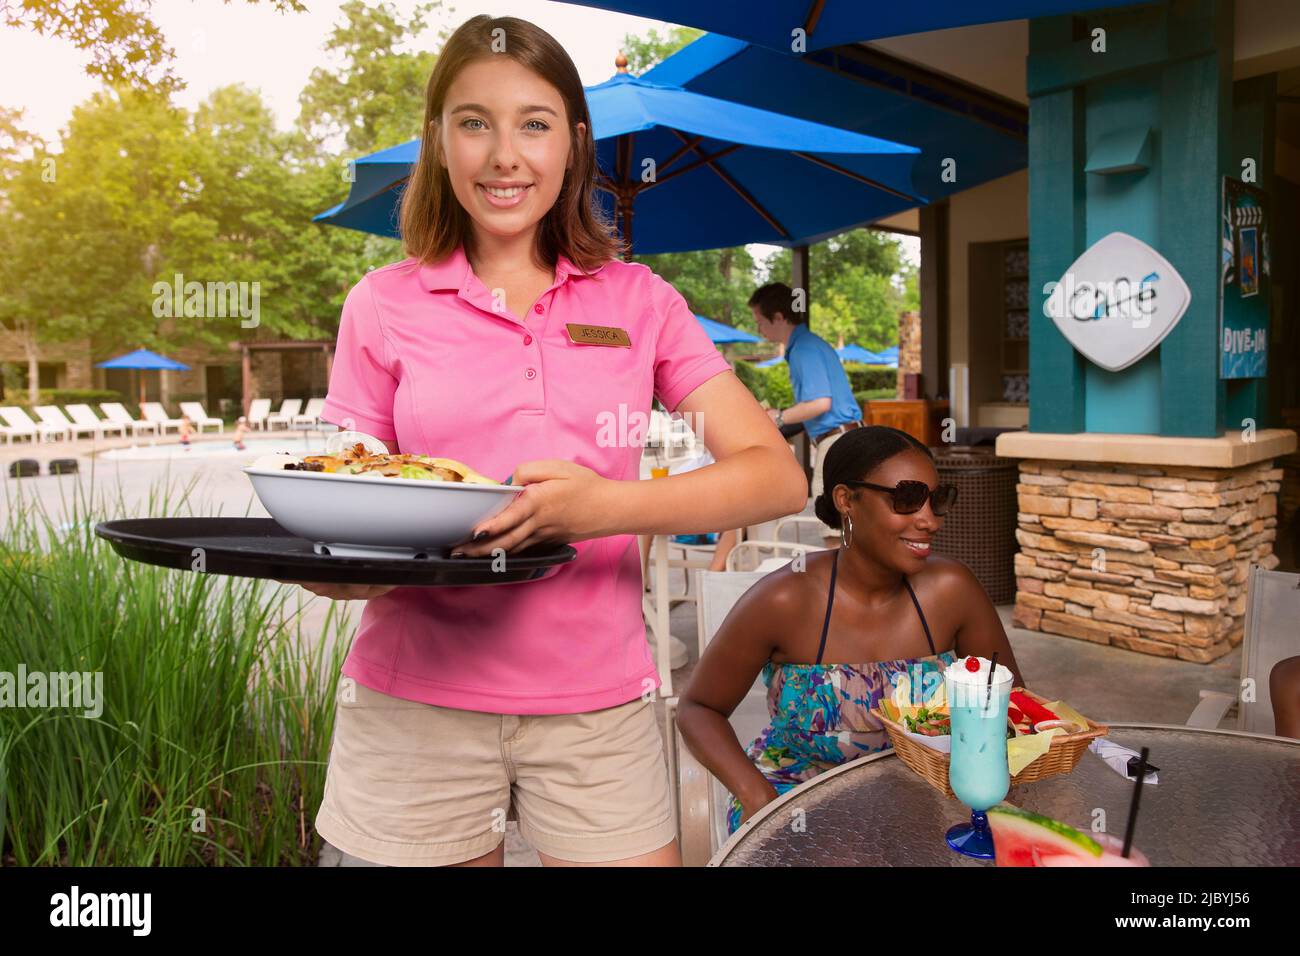 Portrait of a female waitress delivering salad to guest at poolside Hotel Cafe Stock Photo